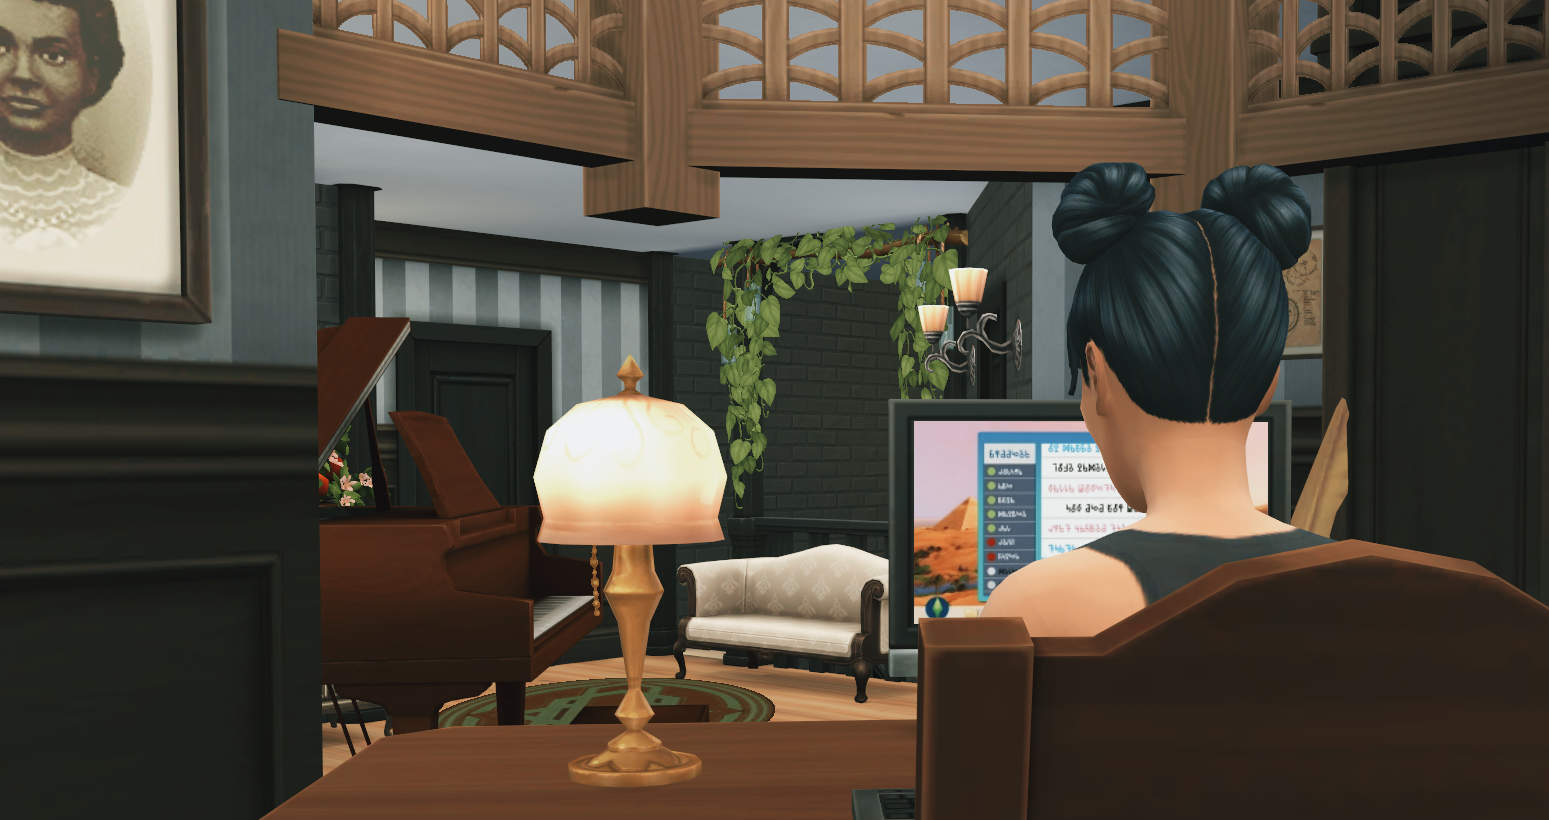 Sims 4 Official Patch Notes: 15 February 2022 update